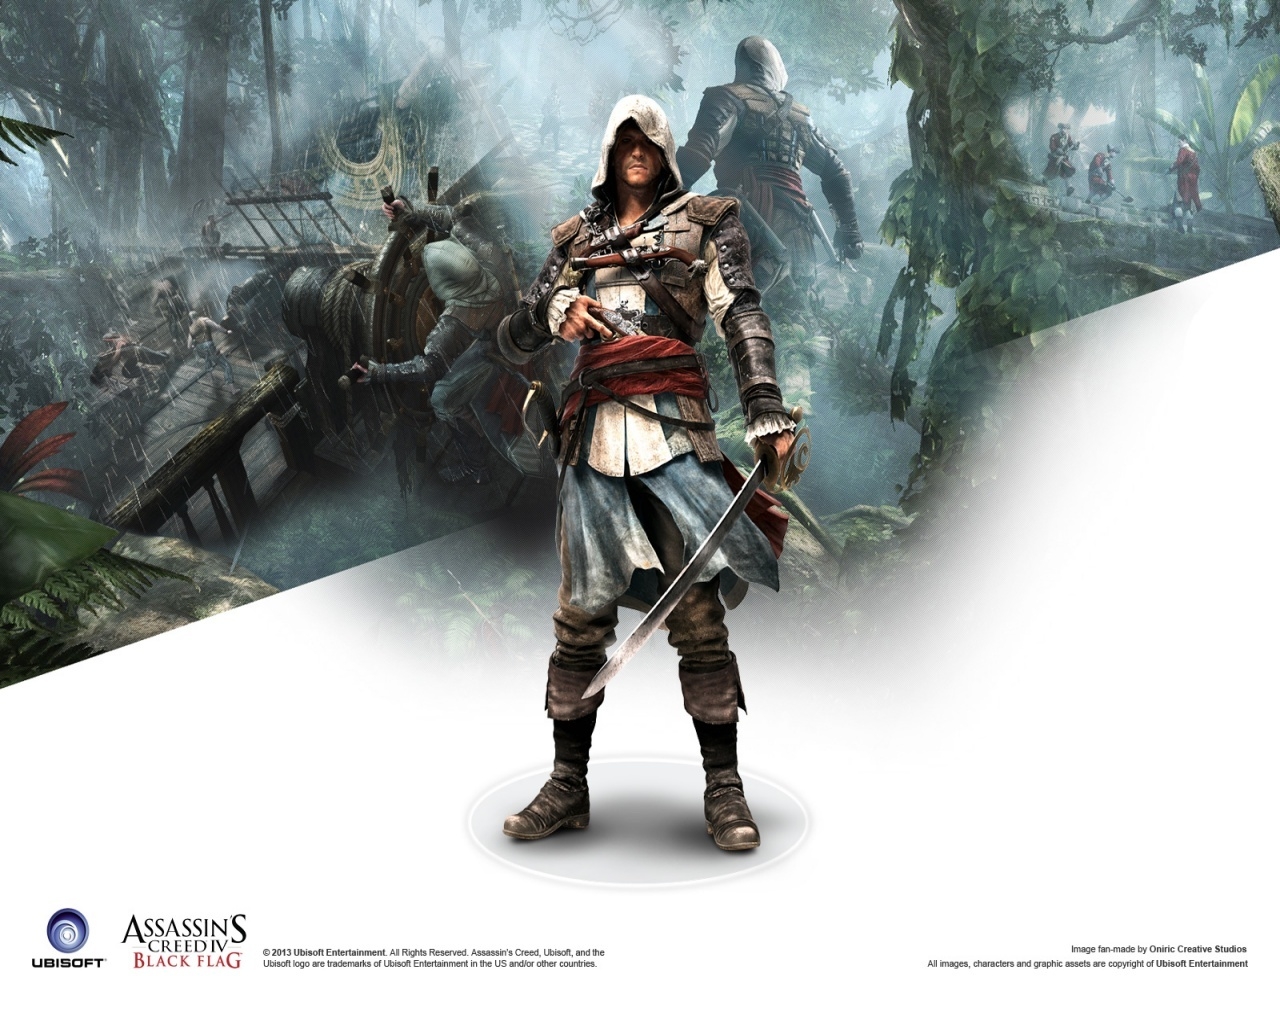 Assassins Creed 4 for 1280 x 1024 resolution